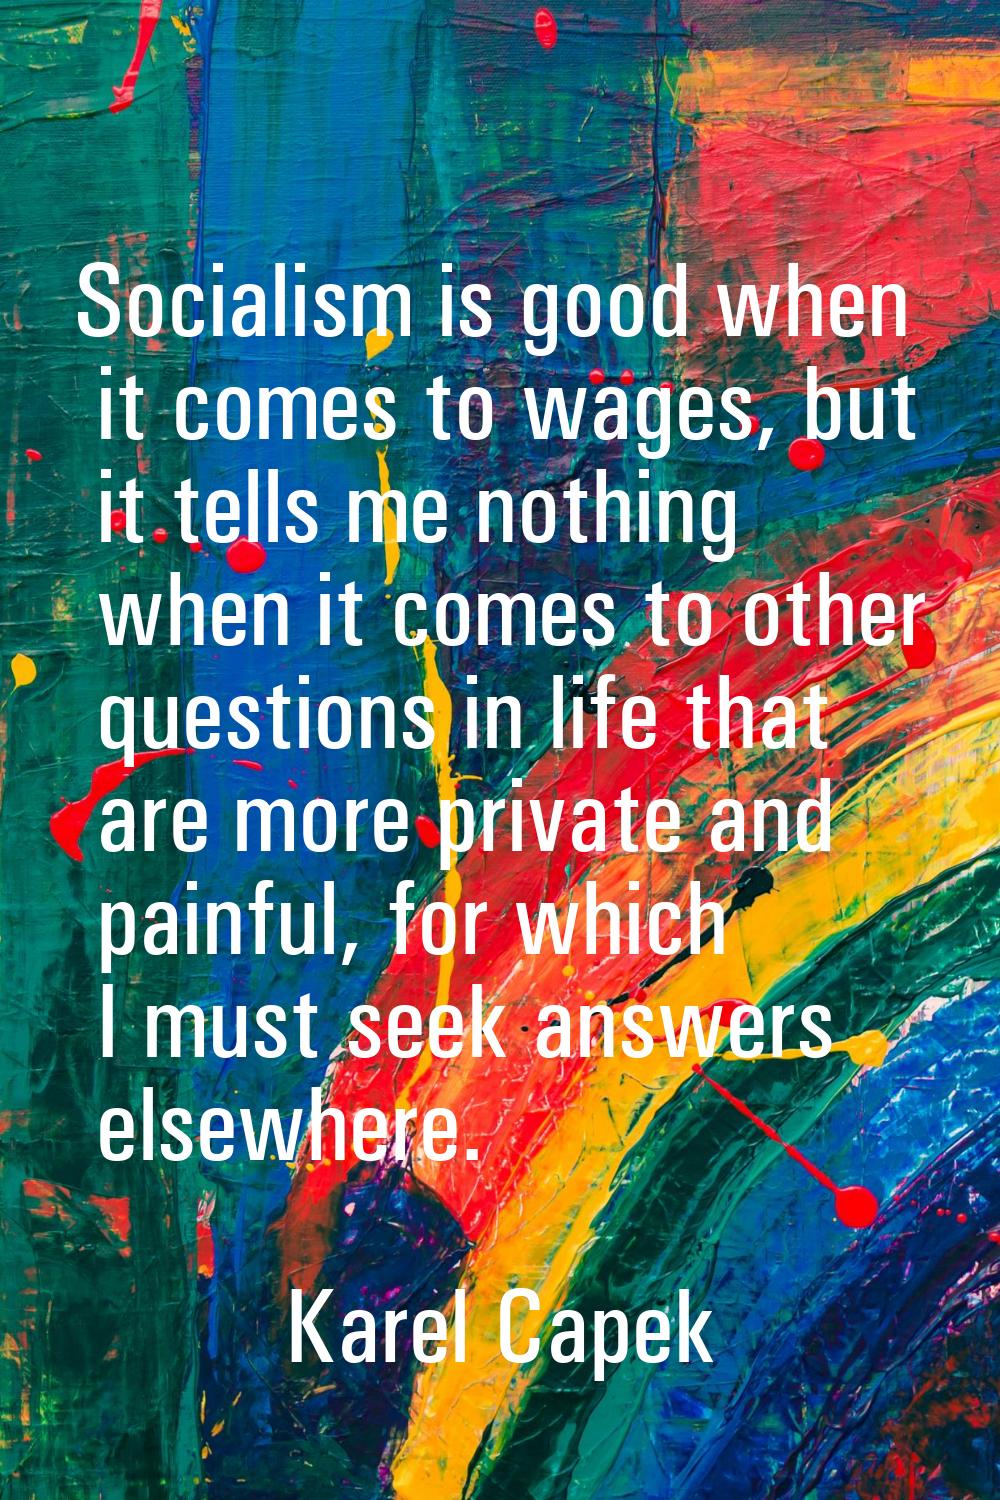 Socialism is good when it comes to wages, but it tells me nothing when it comes to other questions 